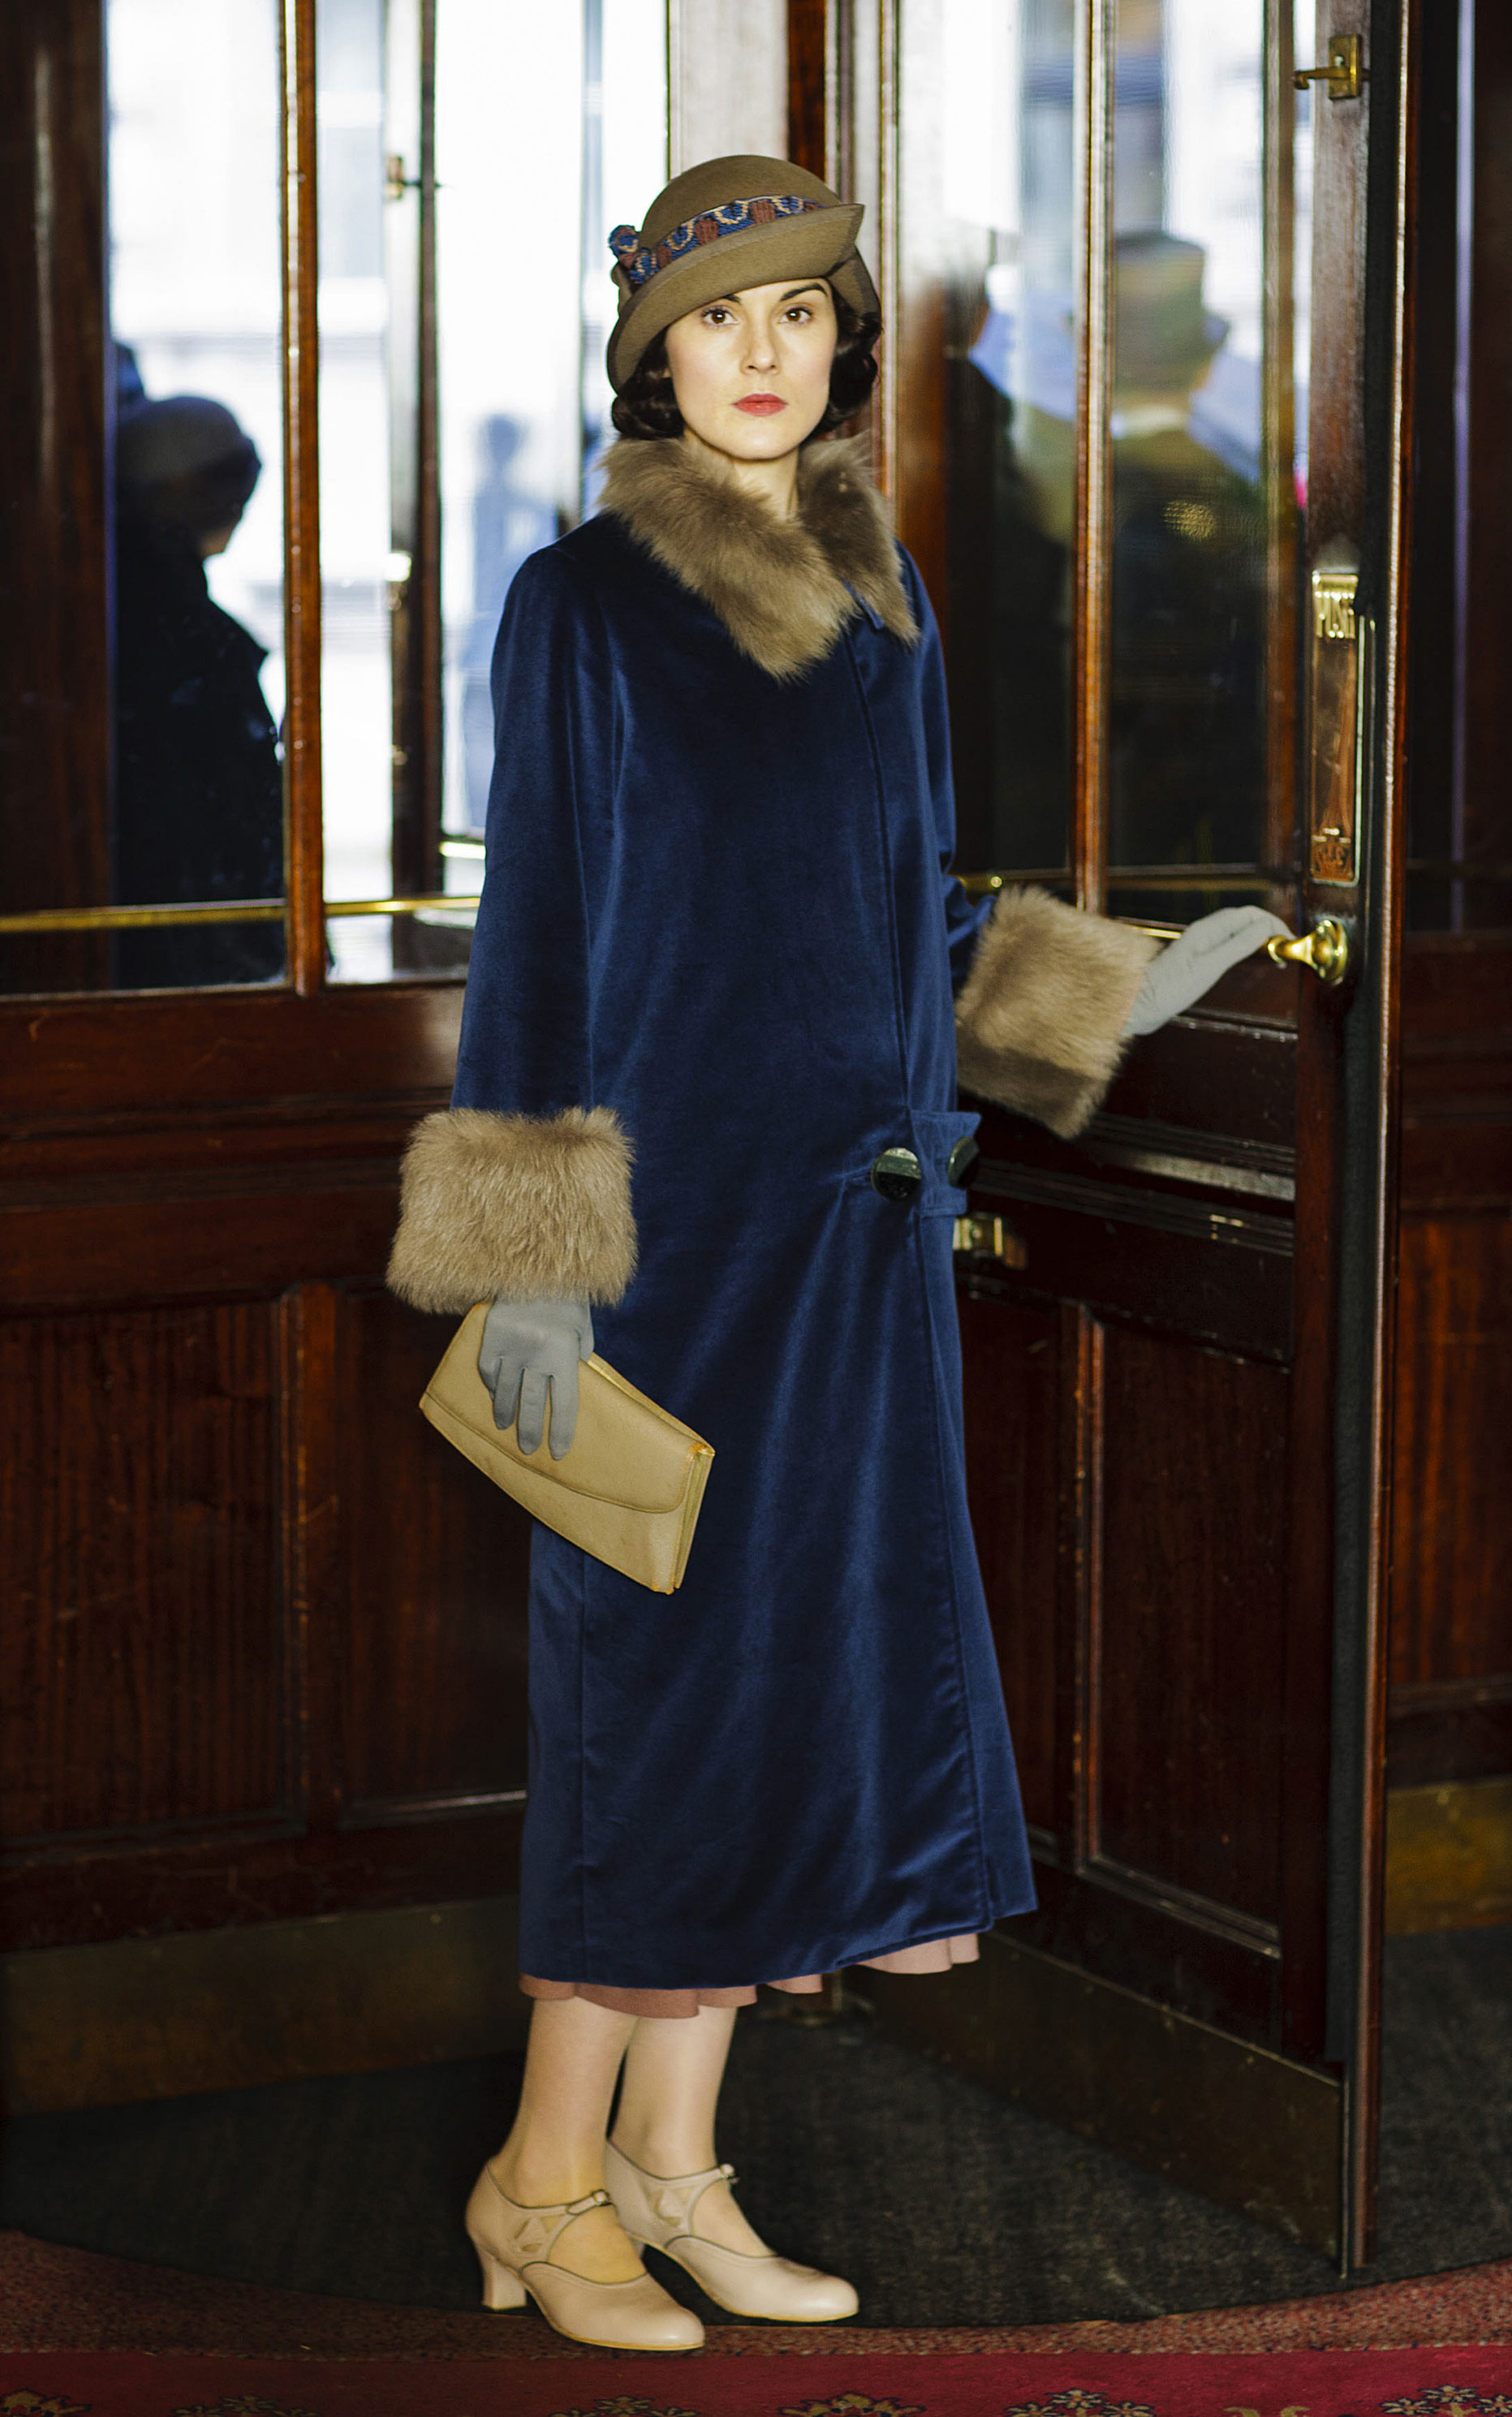 <p><a href="https://www.wonderwall.com/celebrity/profiles/overview/michelle-dockery-1488.article">Michelle Dockery</a>'s Lady Mary wore this beautiful blue fur-trimmed look during season 5, which was set in 1924.</p><p>MORE: <a href="https://www.wonderwall.com/entertainment/tv/best-period-pieces-watch-right-now-3010192.gallery">The best television period dramas</a></p>